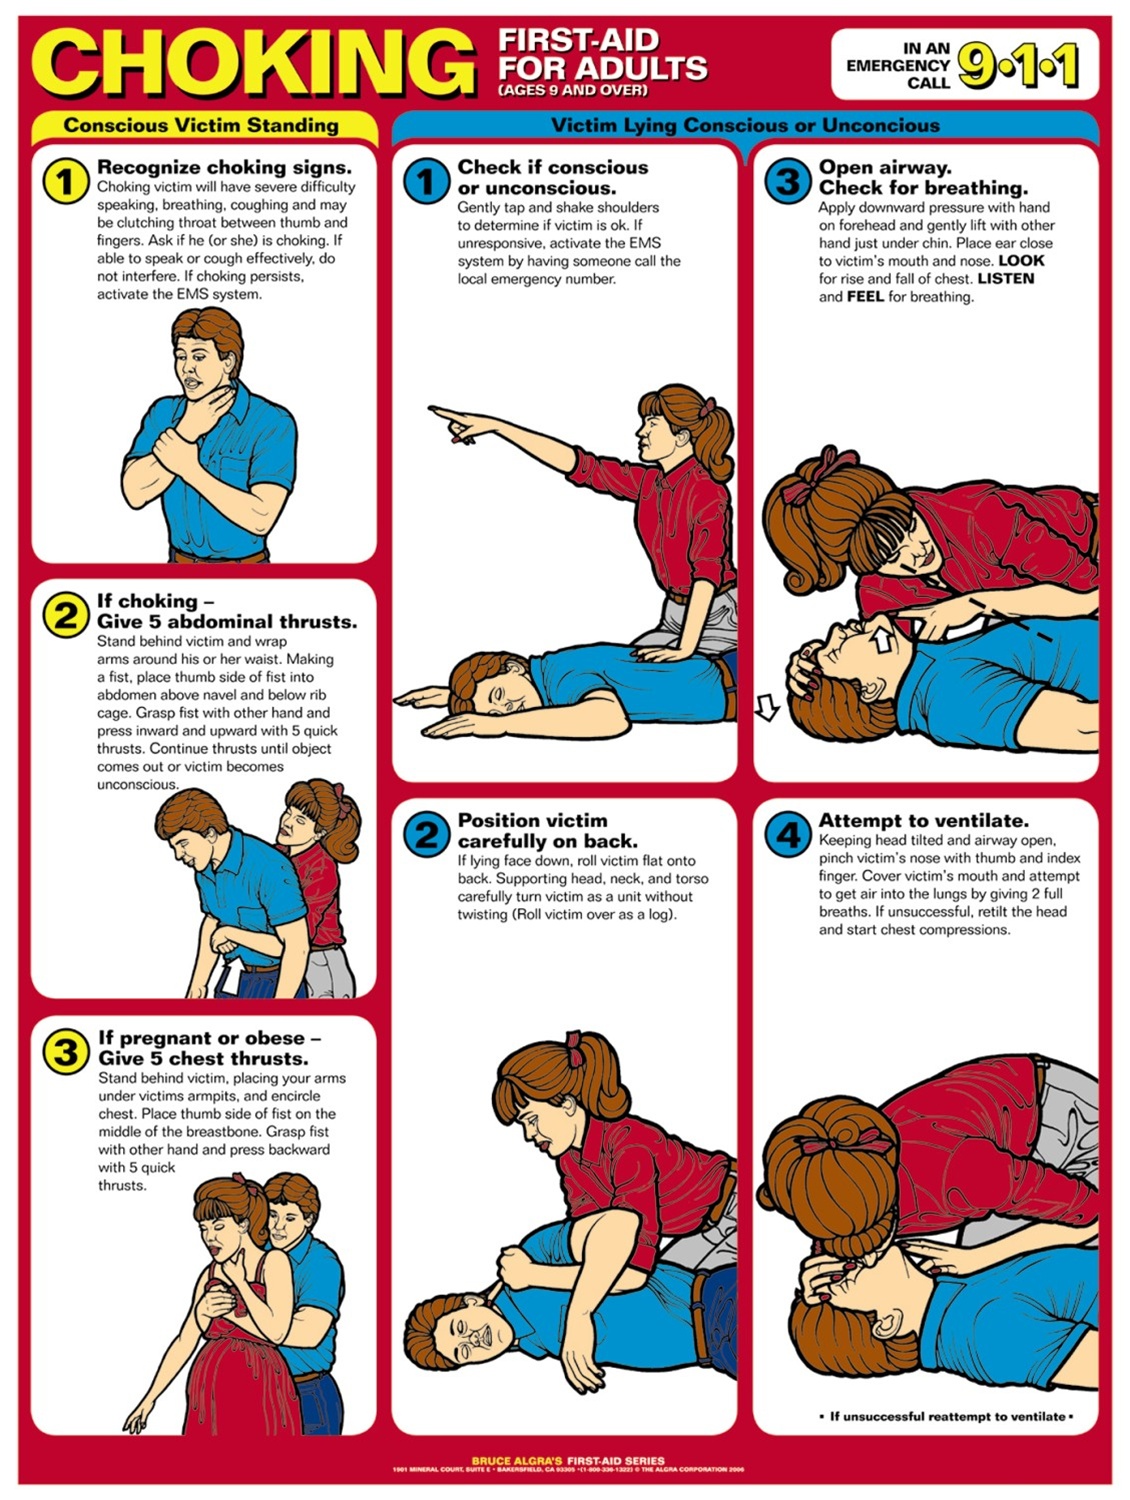 6 Best Images of First Aid Choking In Spanish Printable - First Aid